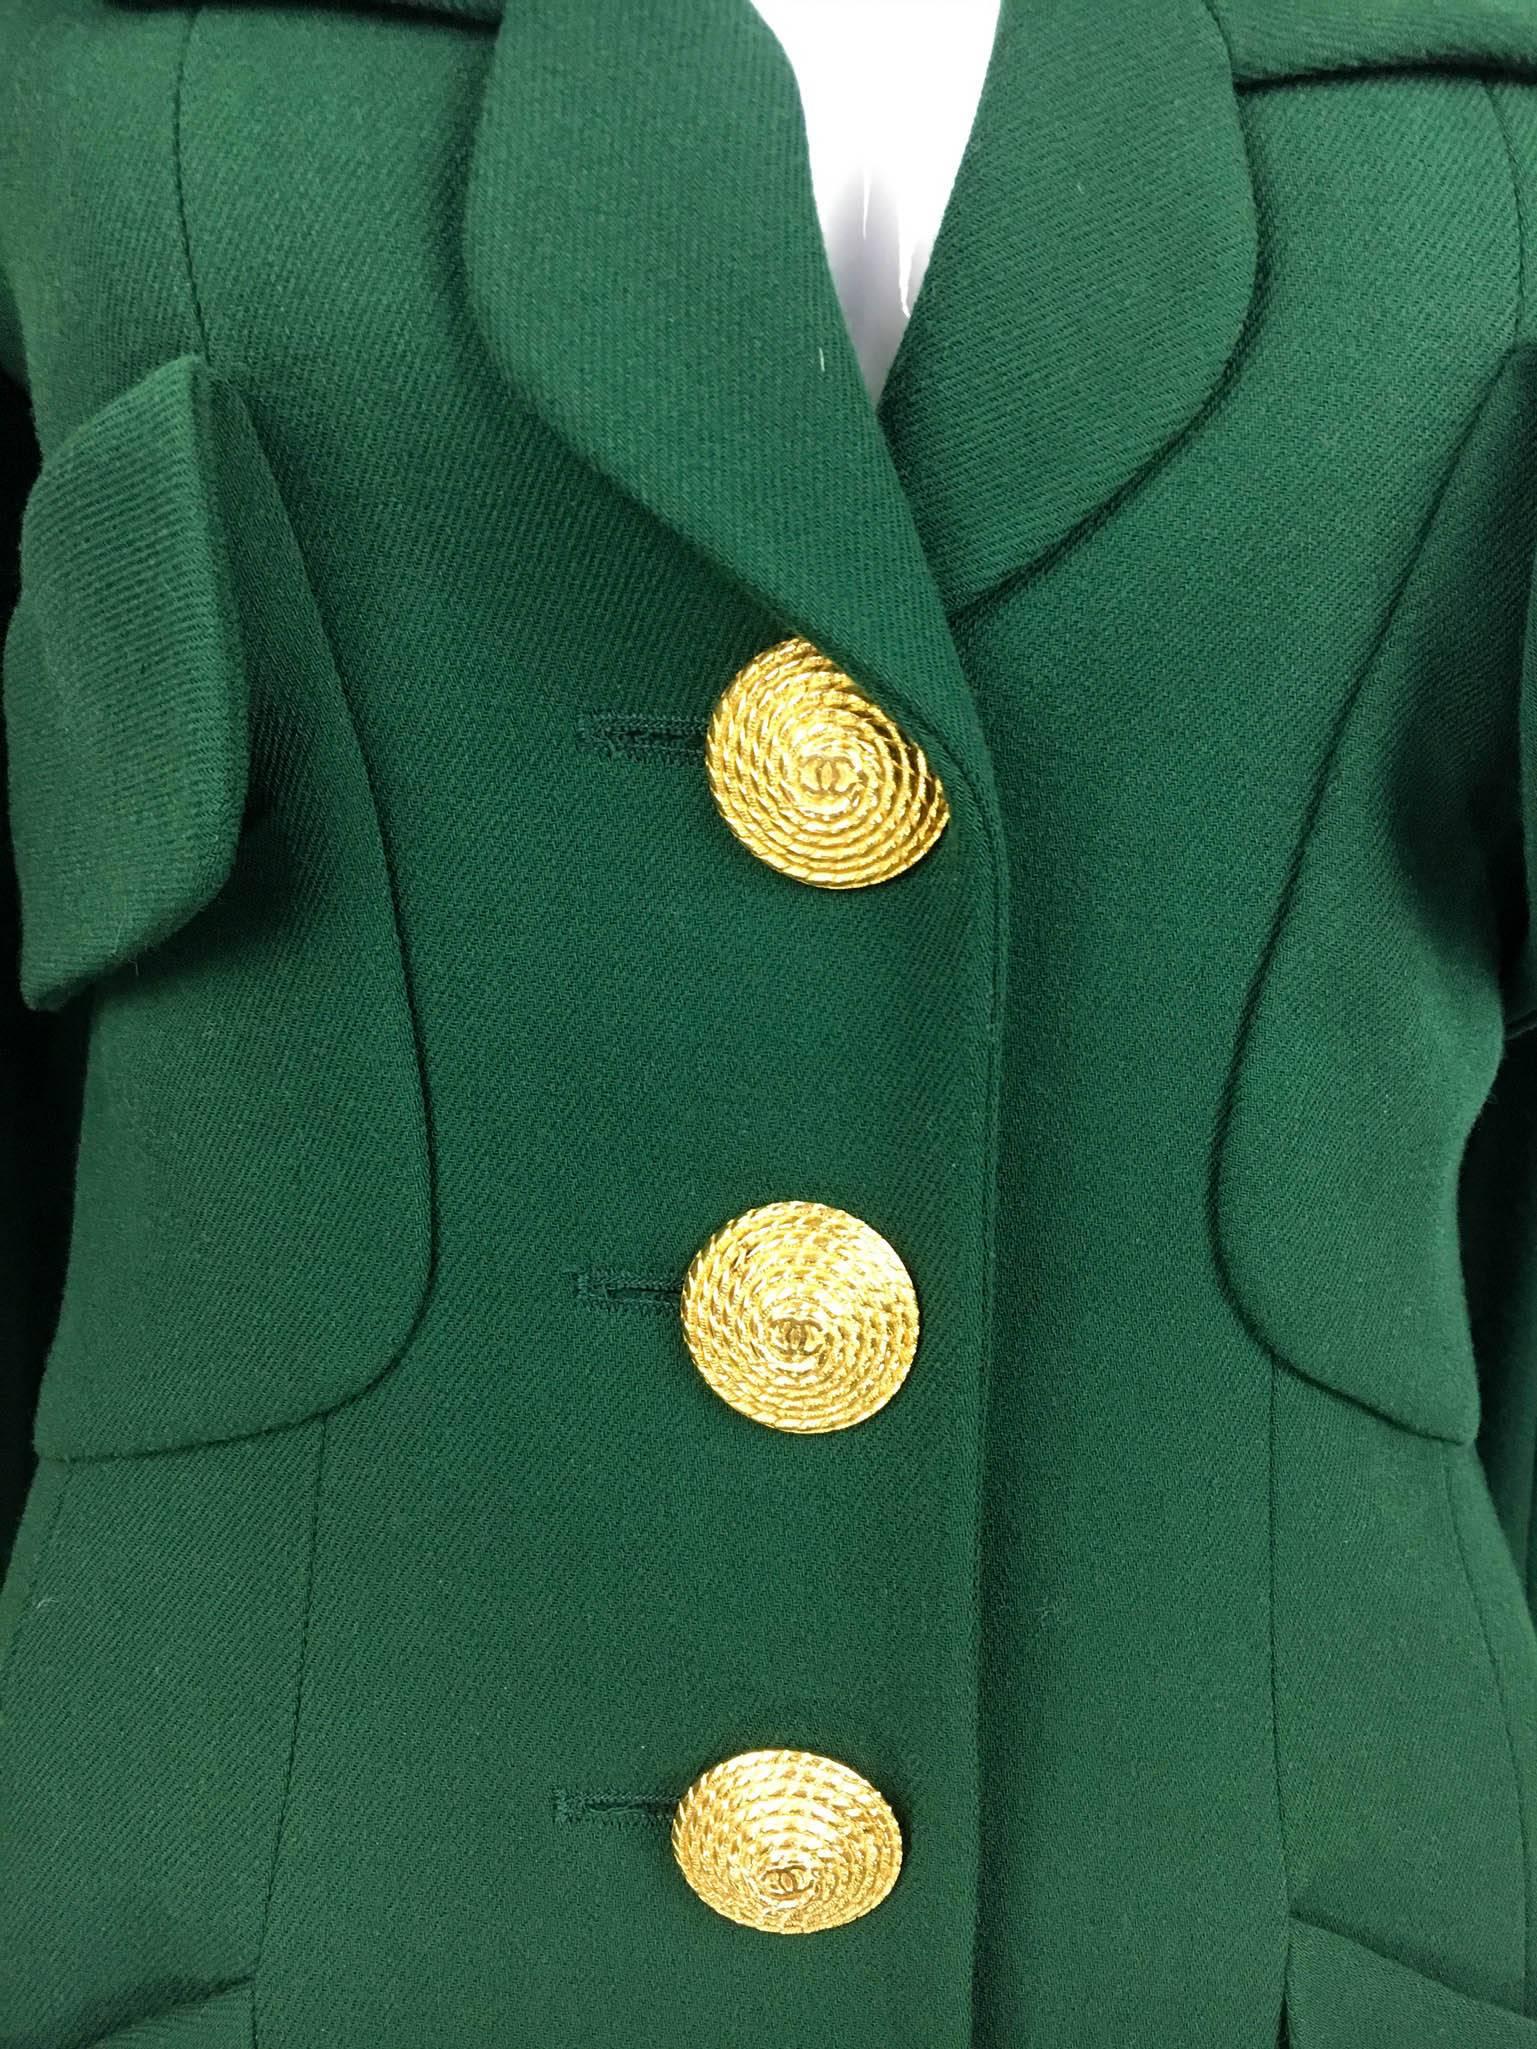 Chanel Bottle Green Wool Suit With Large Gold-Tone Logo Rope Buttons - 1992 2